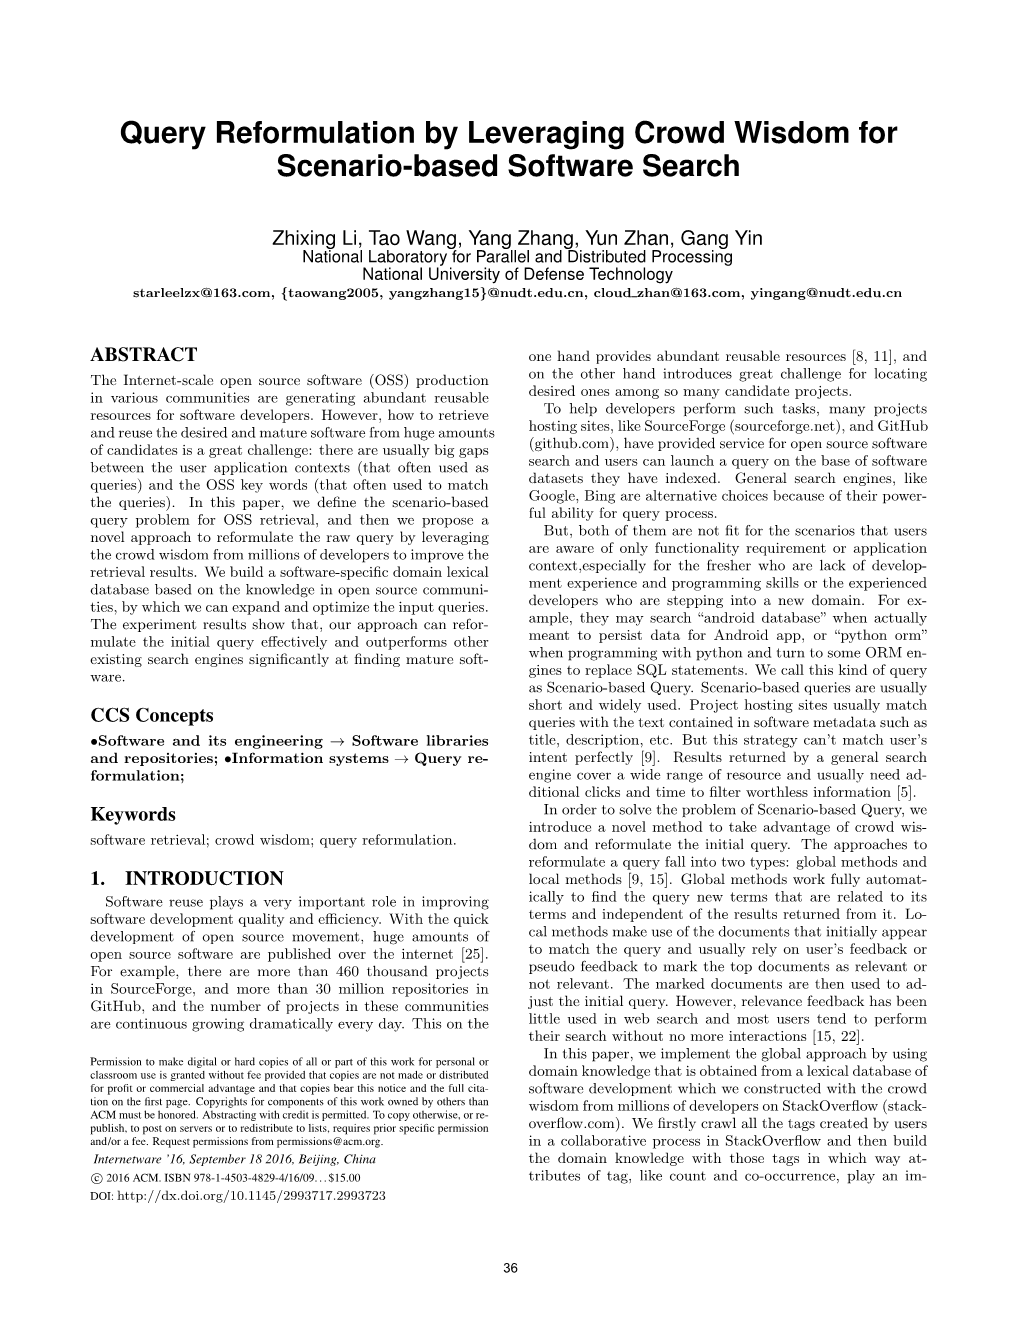 Query Reformulation by Leveraging Crowd Wisdom for Scenario-Based Software Search